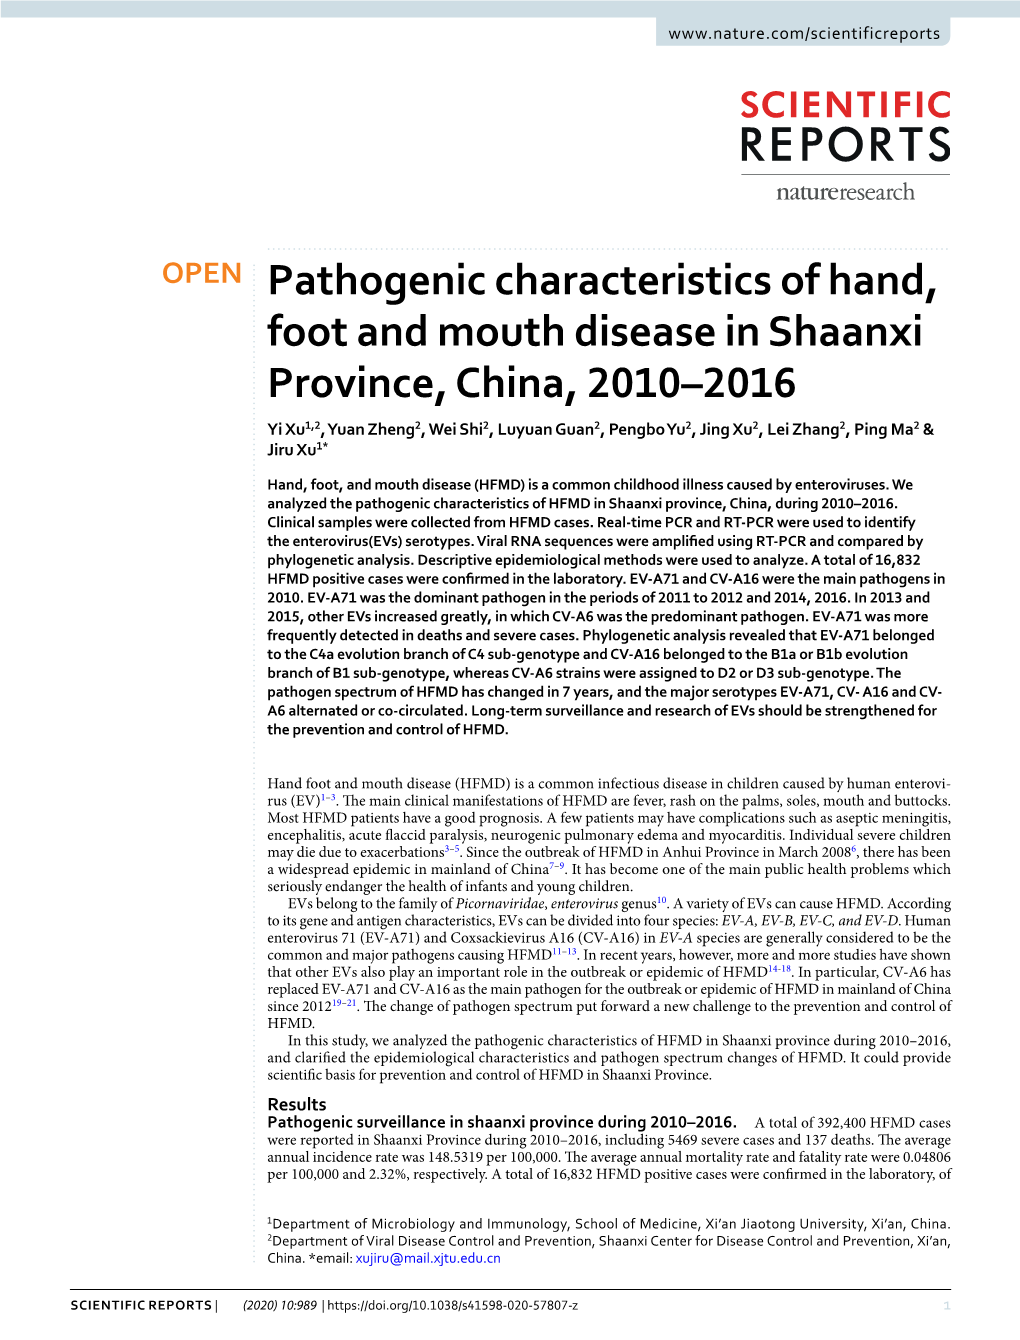 Pathogenic Characteristics of Hand, Foot and Mouth Disease in Shaanxi